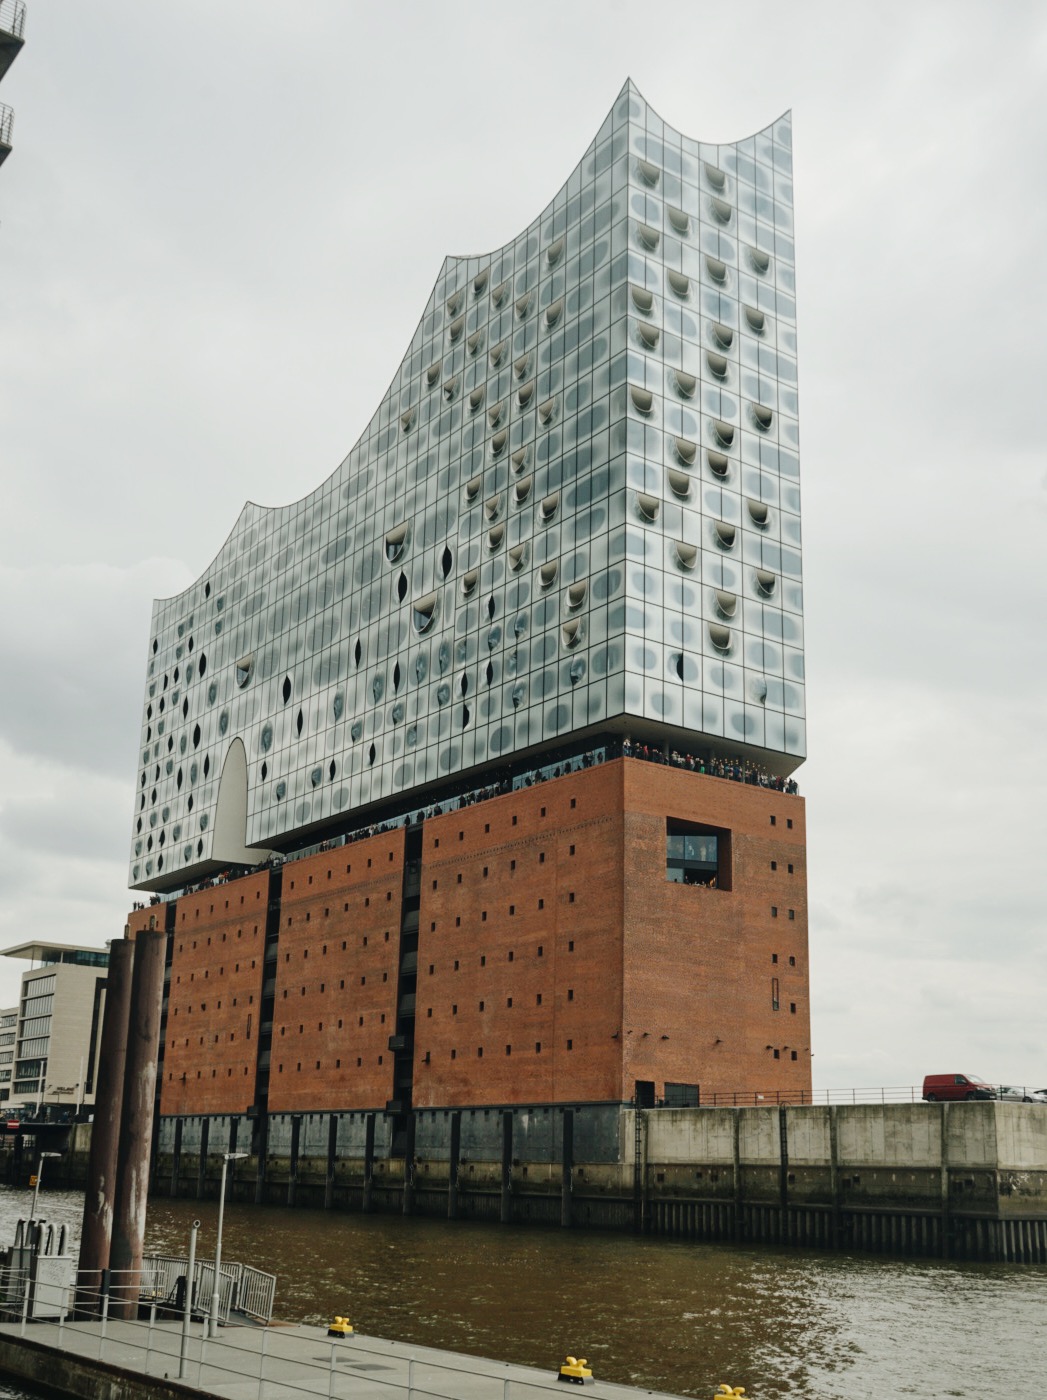 Elbphilharmonie on Hamburg from the outside